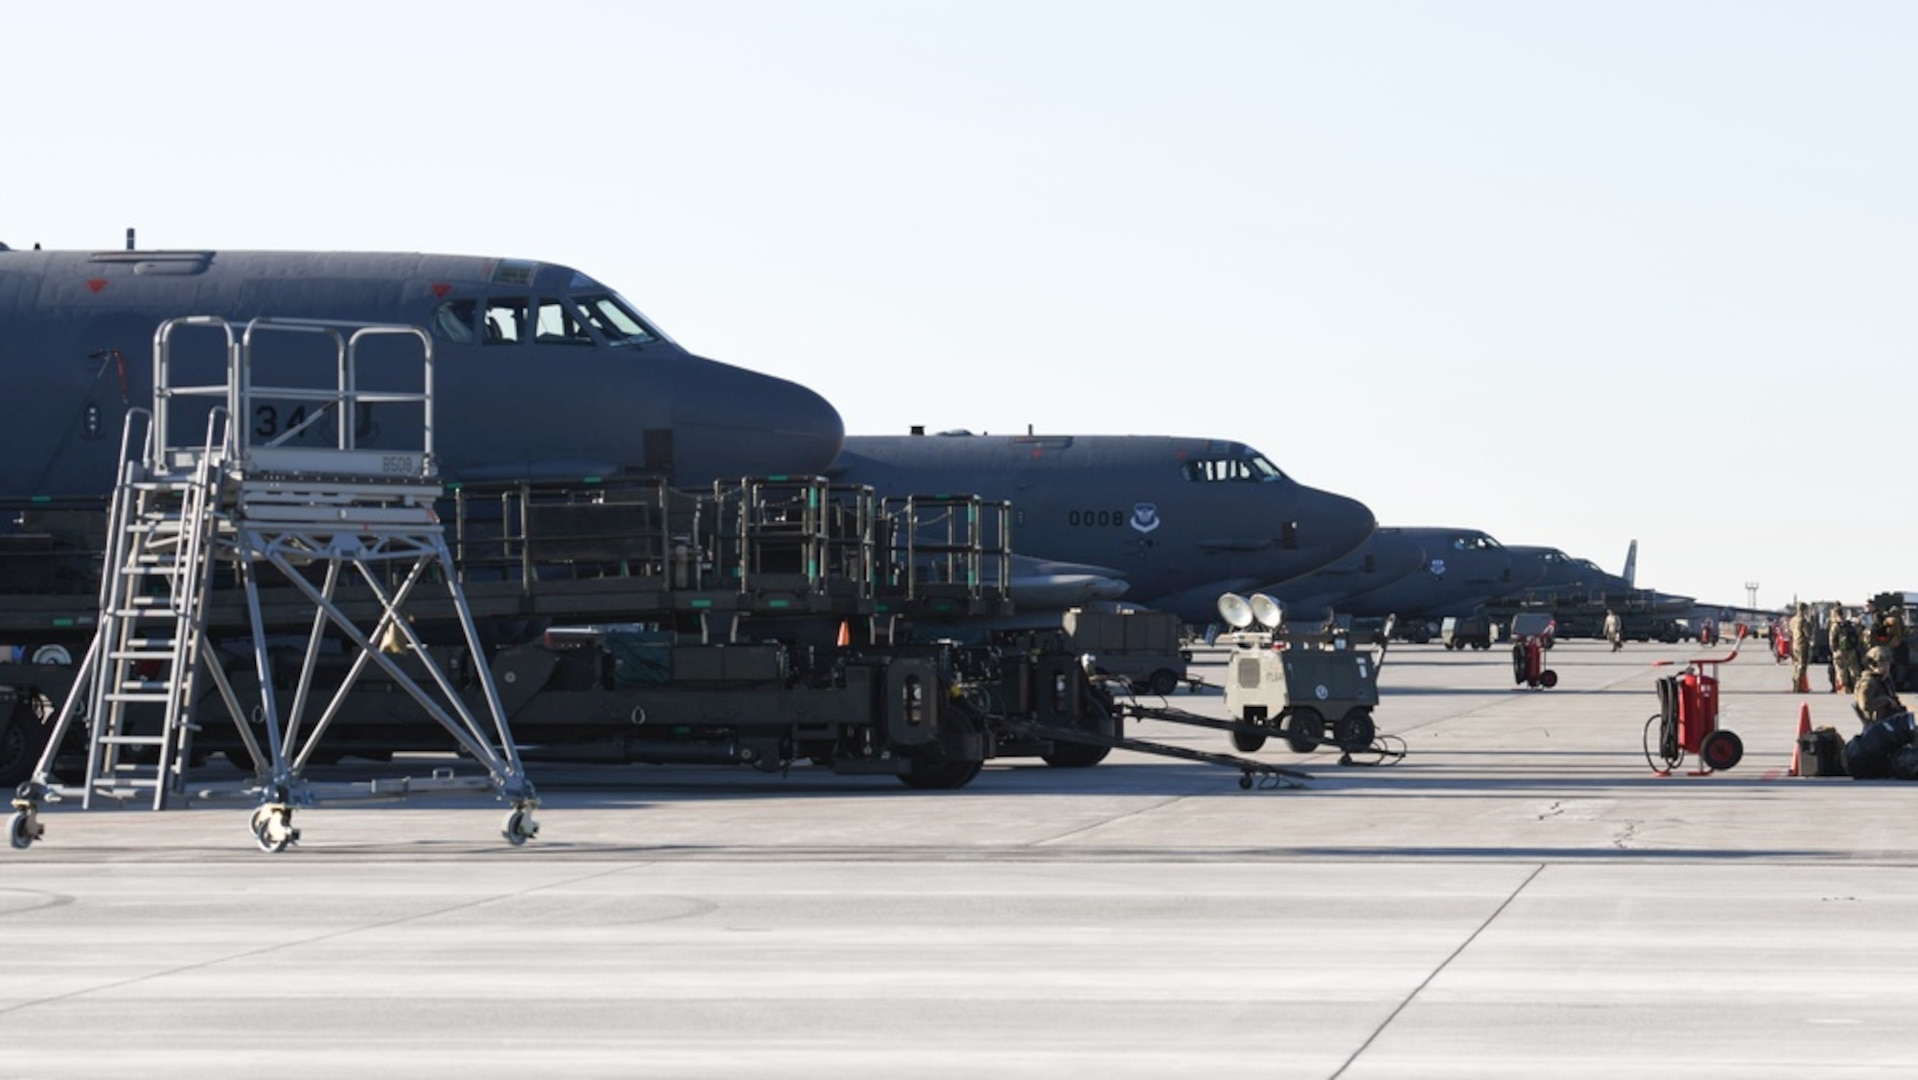 Every year U.S. Strategic Command holds a nuclear-command and control exercise, Global Thunder, which tests and validates the nuclear operation process, exercises like these demonstrate the readiness of the nation’s nuclear capabilities. Global Thunder 22 tested Team Minot’s 5th Bomb Wing and 91st Missile Wing.